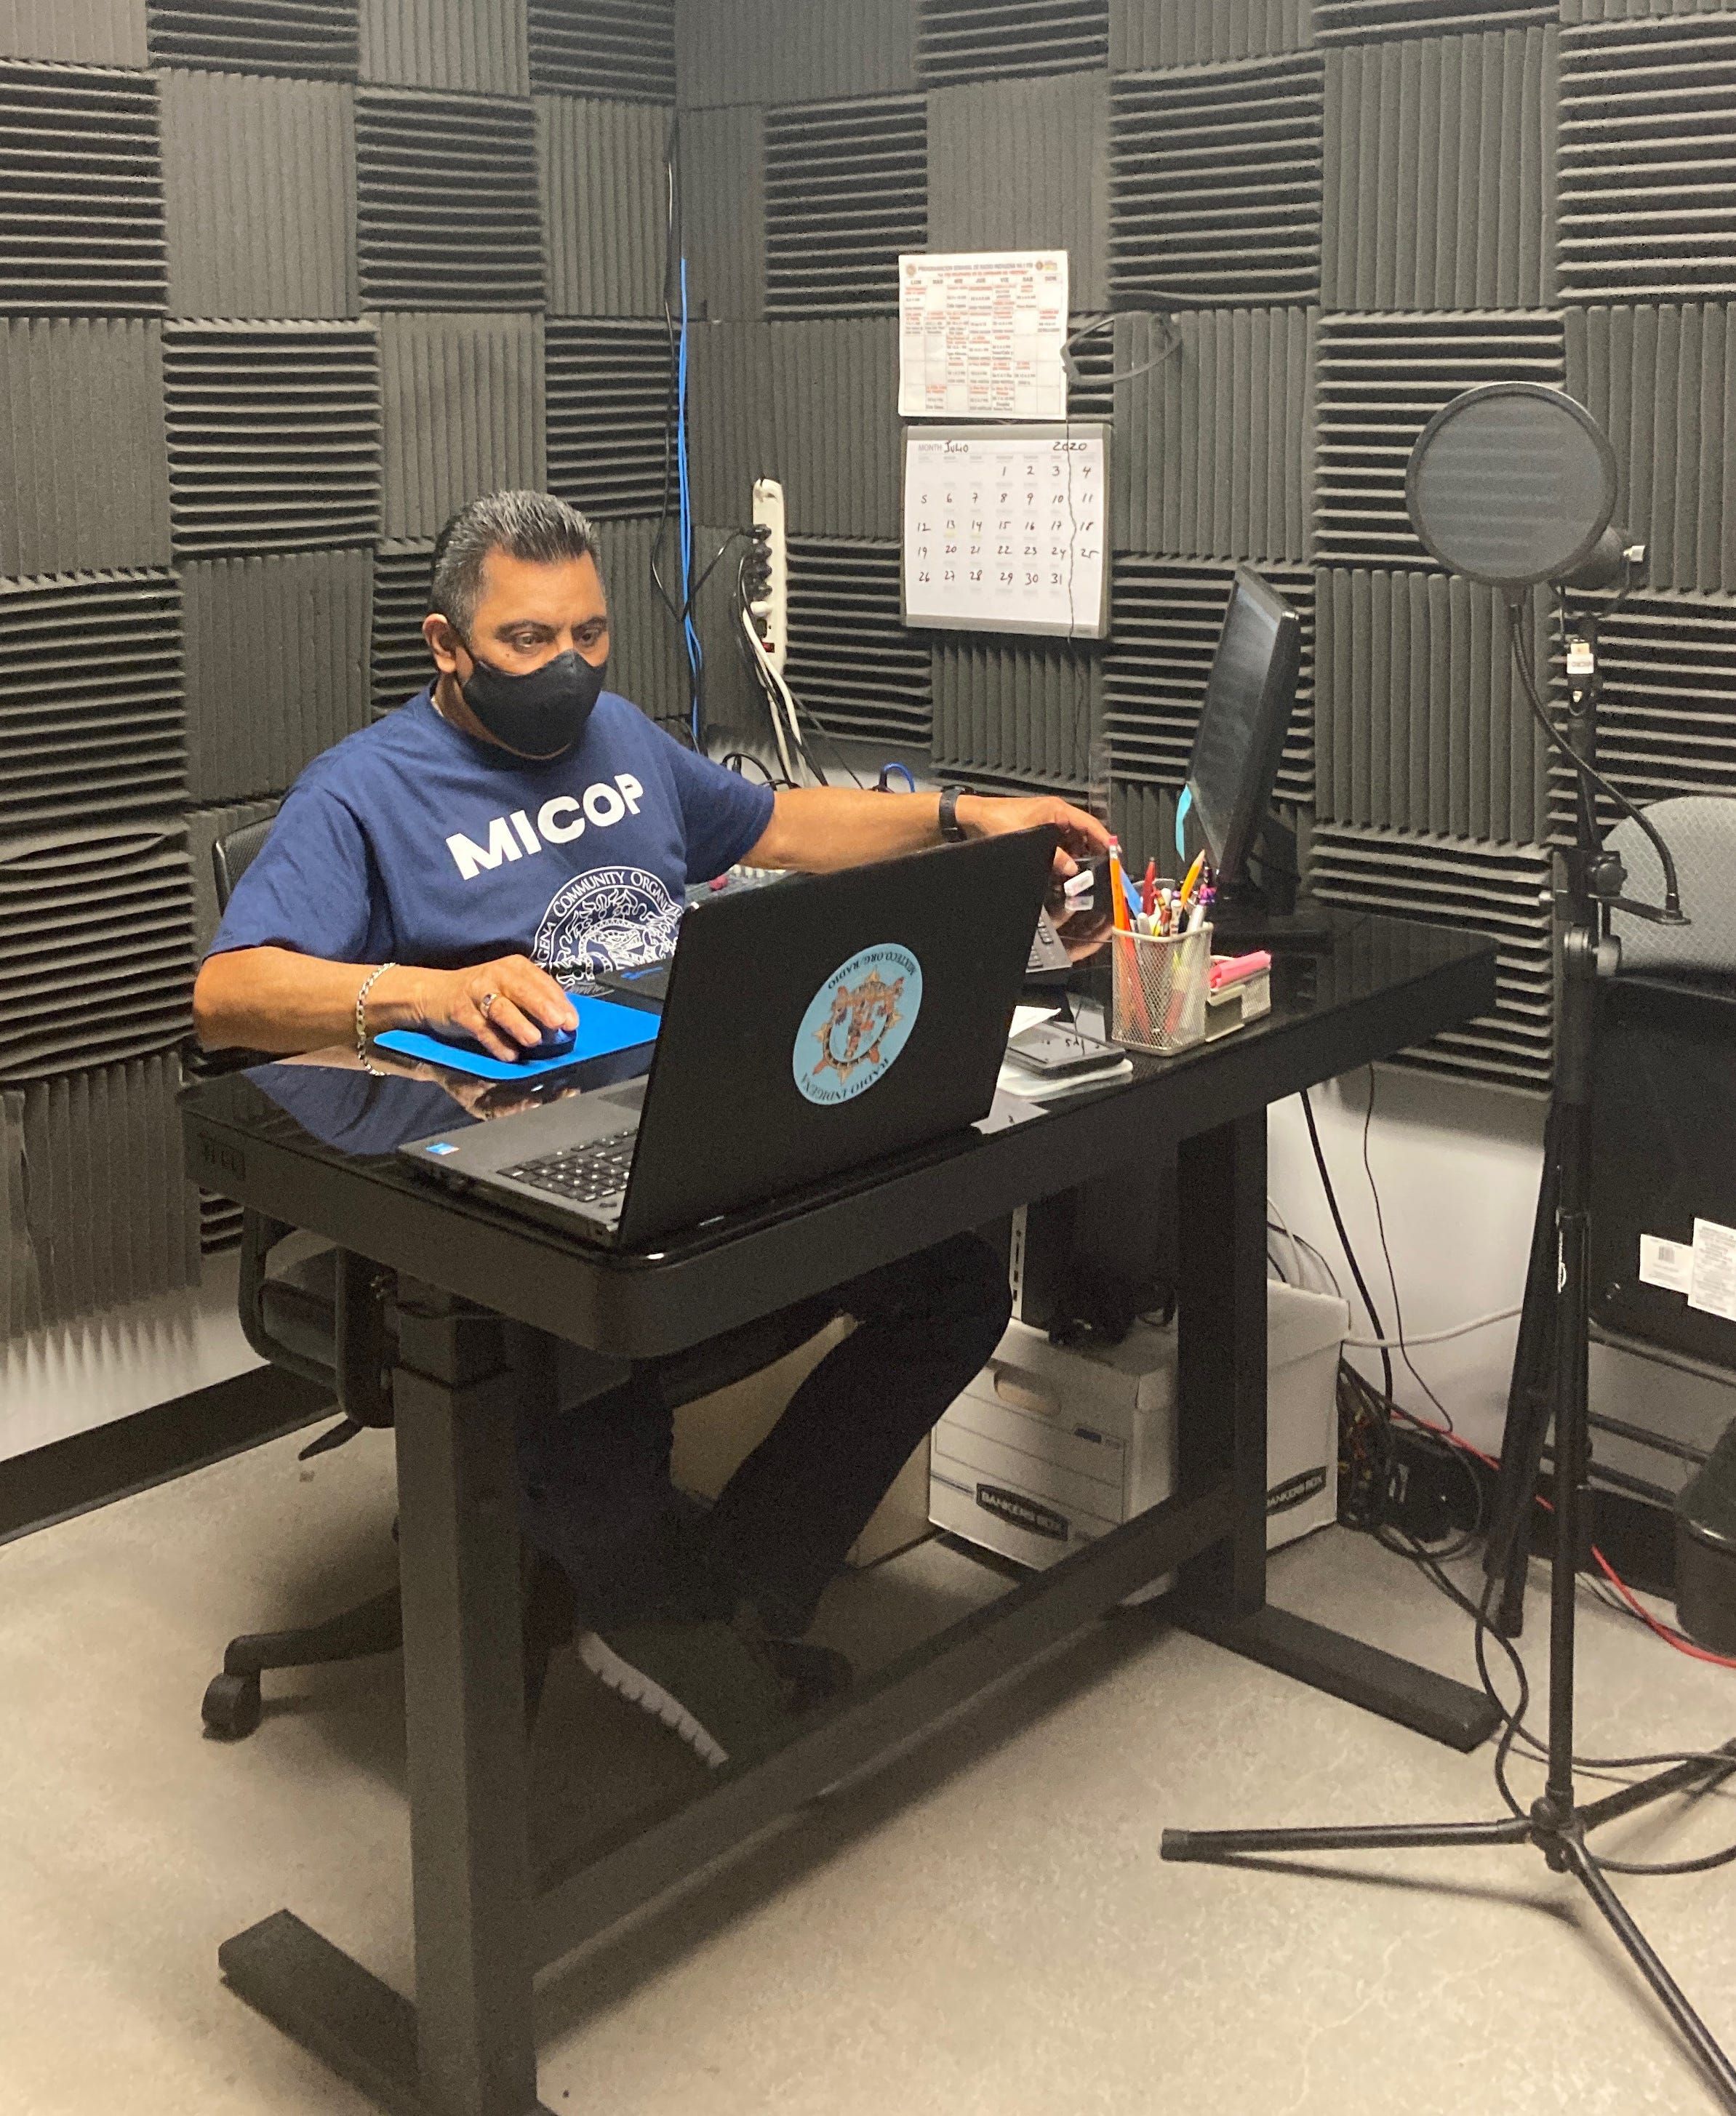 Fransisco Ulloa coordinates Radio Indígena from his office space at Mixteco/Indígena Community Organizing Project in Oxnard in July. Image by Julia Knoerr. United States, 2020.